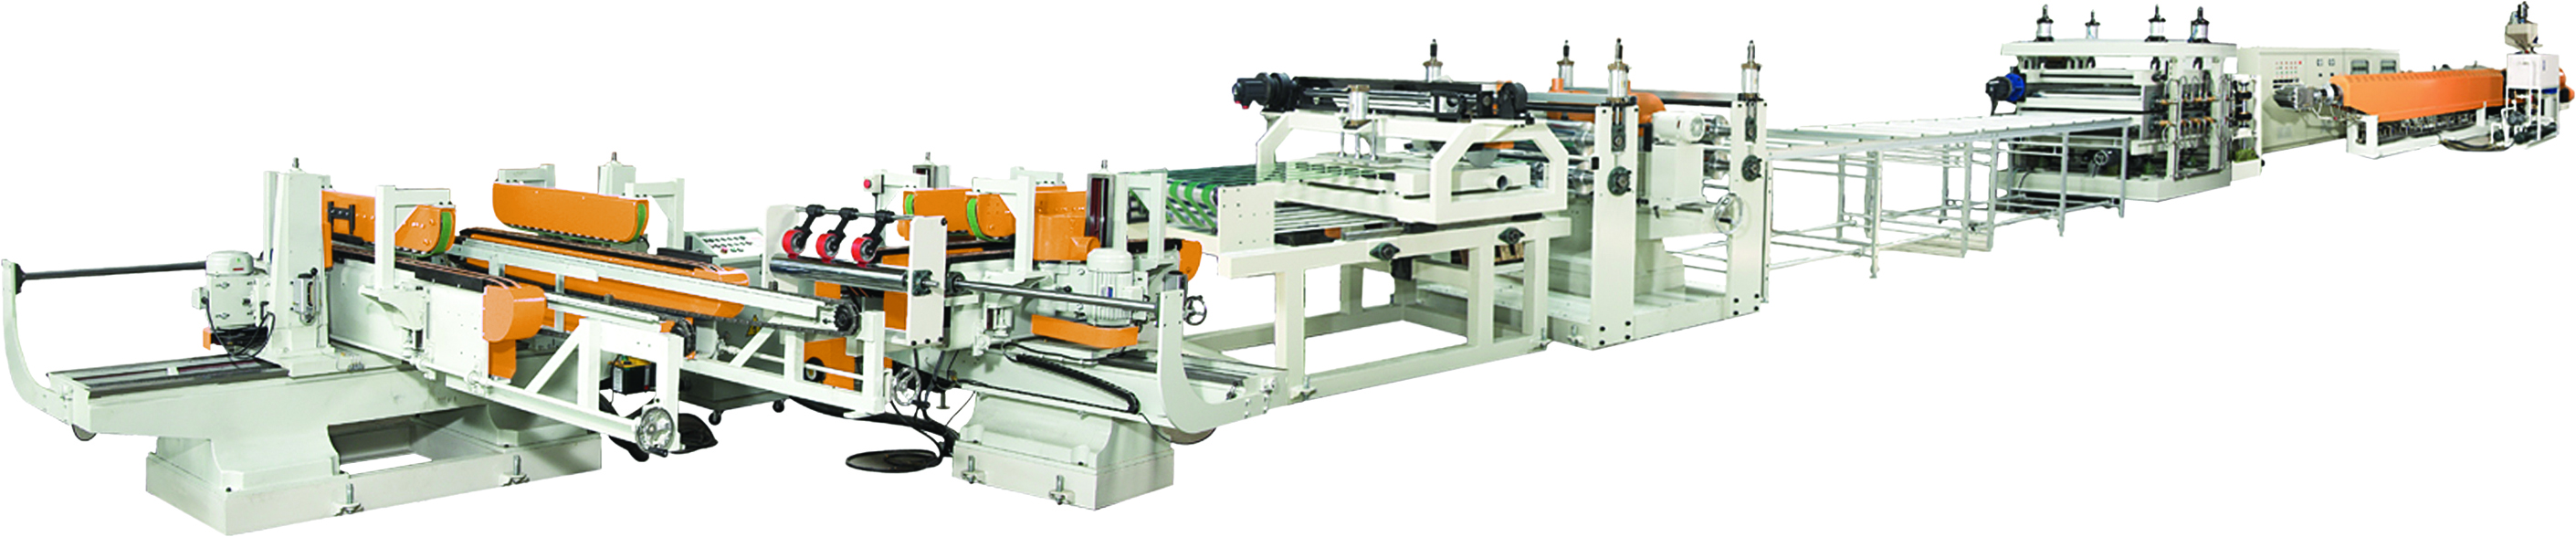 Poly Machinery is versed particularly at developing XPS plank making machines.